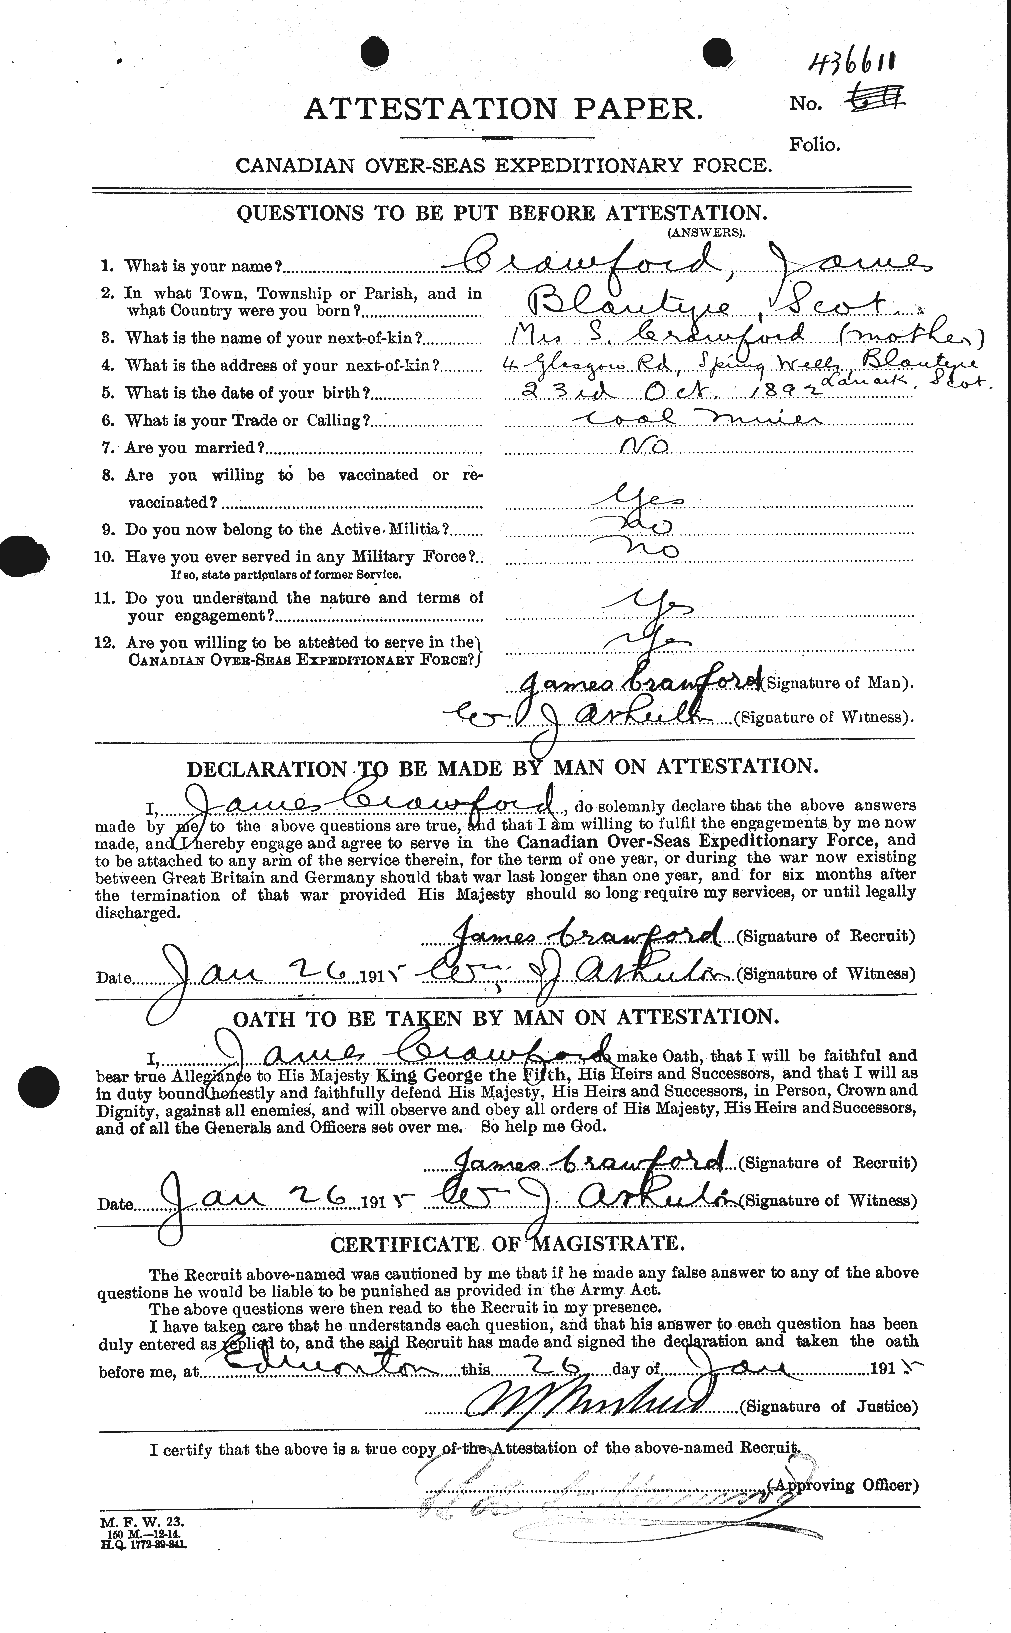 Personnel Records of the First World War - CEF 062766a